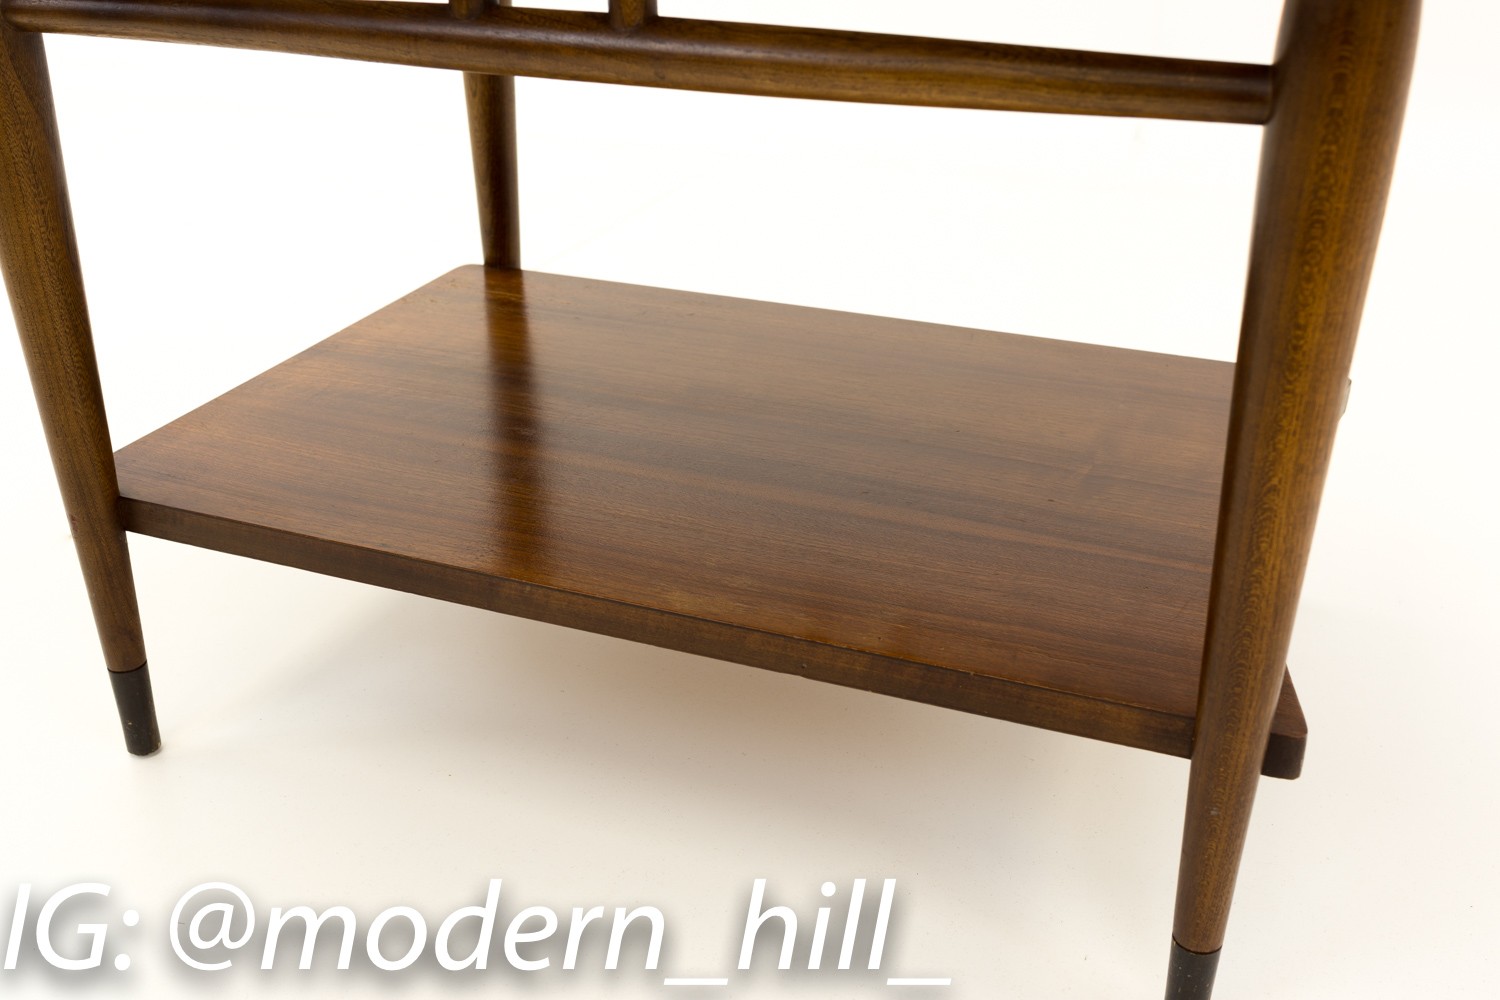 Andre Bus for Lane Acclaim Mid Century Walnut Side End Tables - Matching Pair